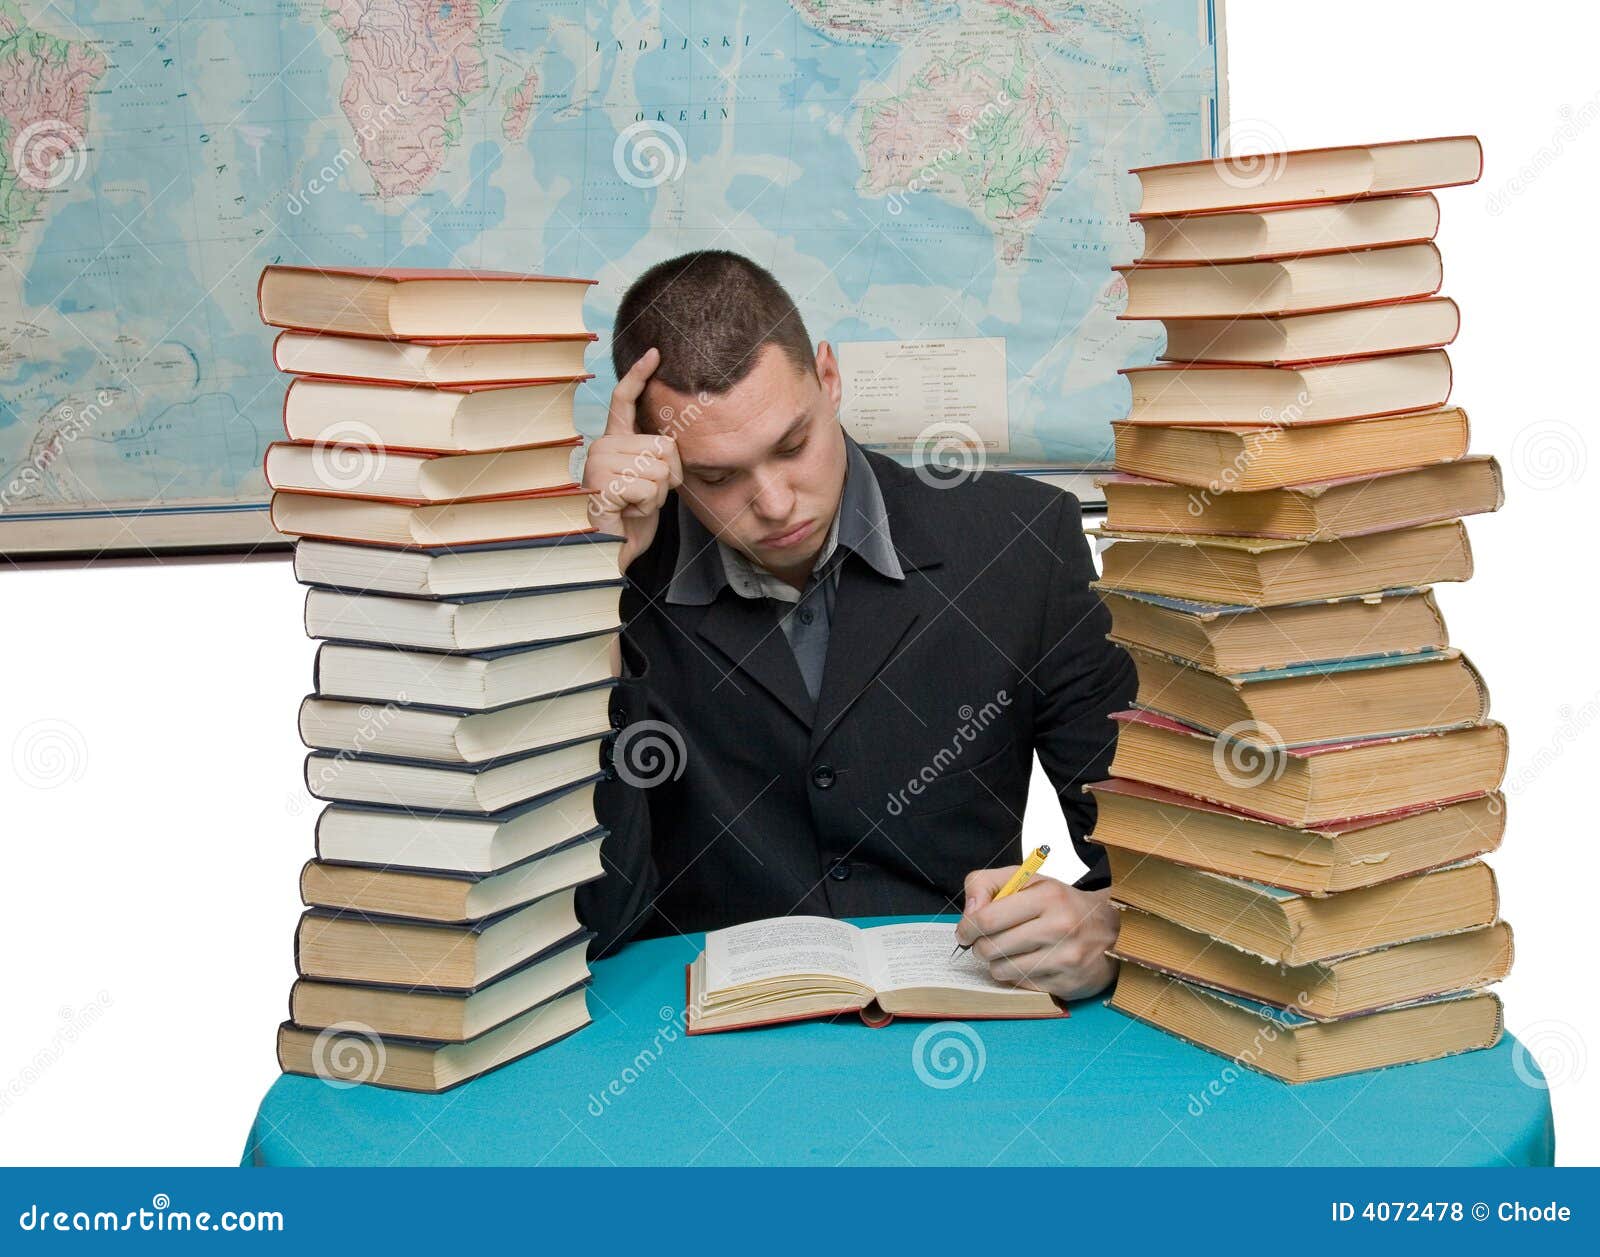 Hard working man stock photo. Image of culture, office - 4072478